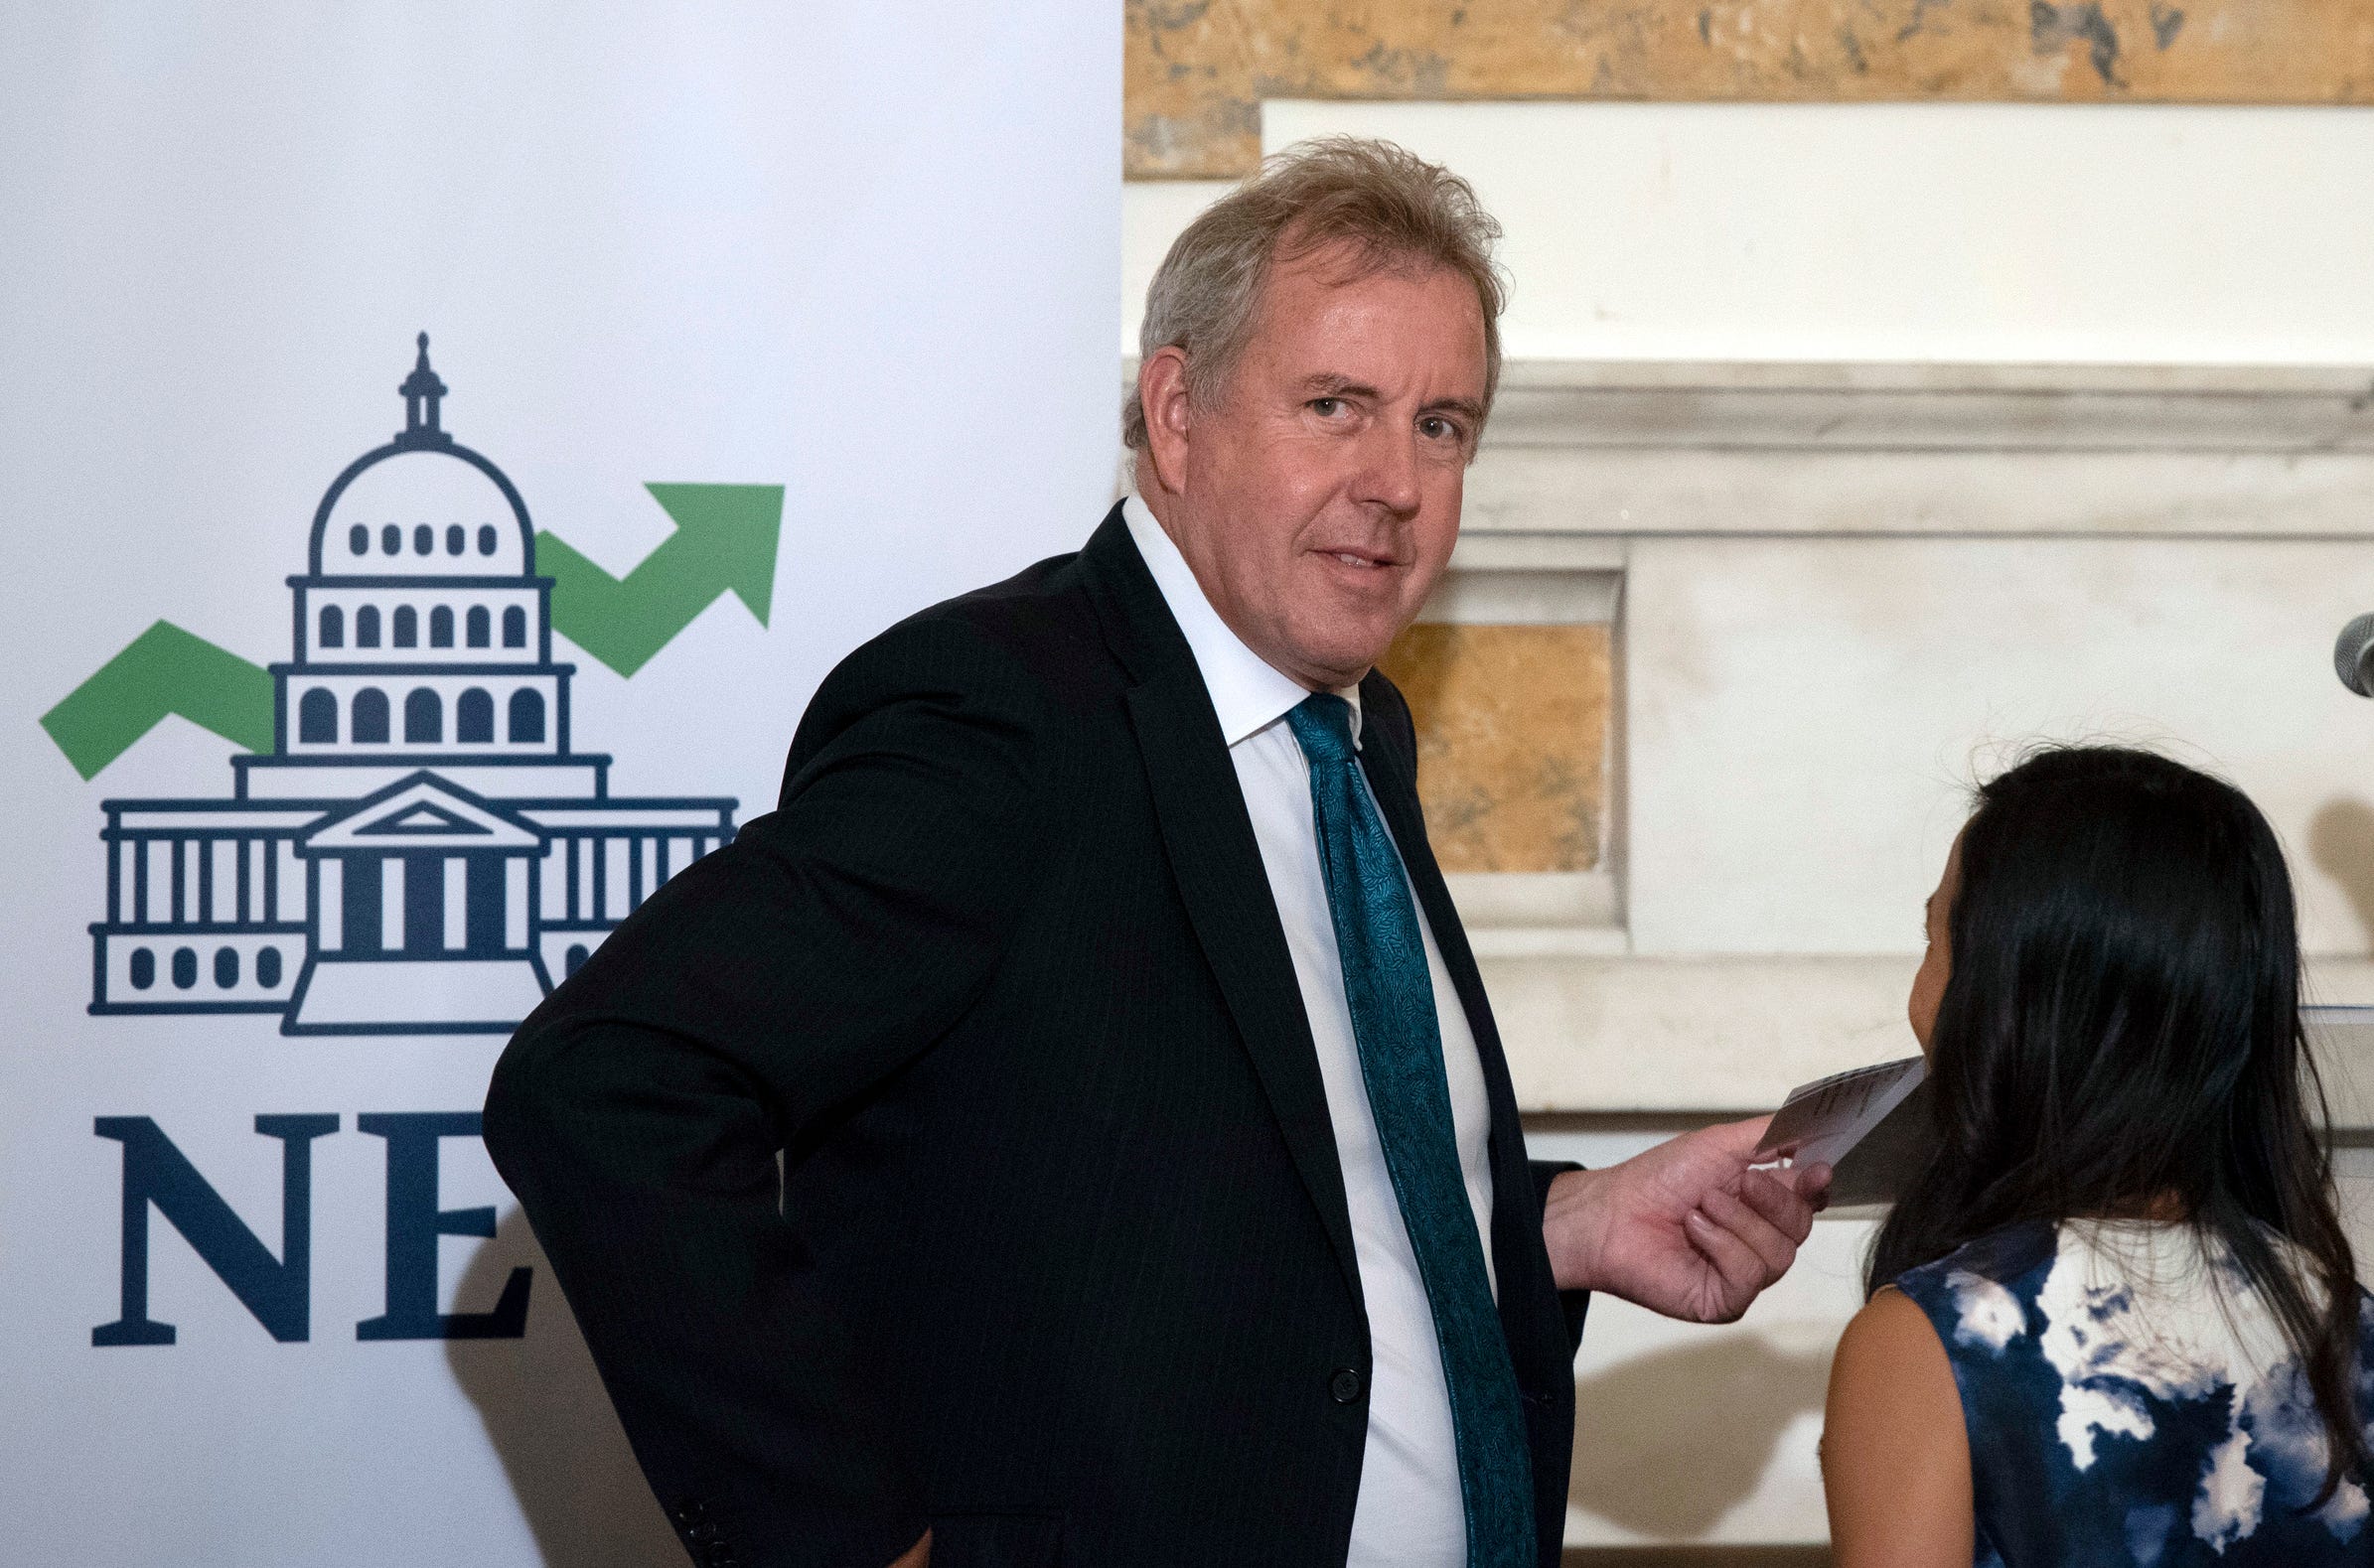 British Ambassador Kim Darroch says President Donald Trump pulled out of an international nuclear deal with Iran as an act of “diplomatic vandalism”